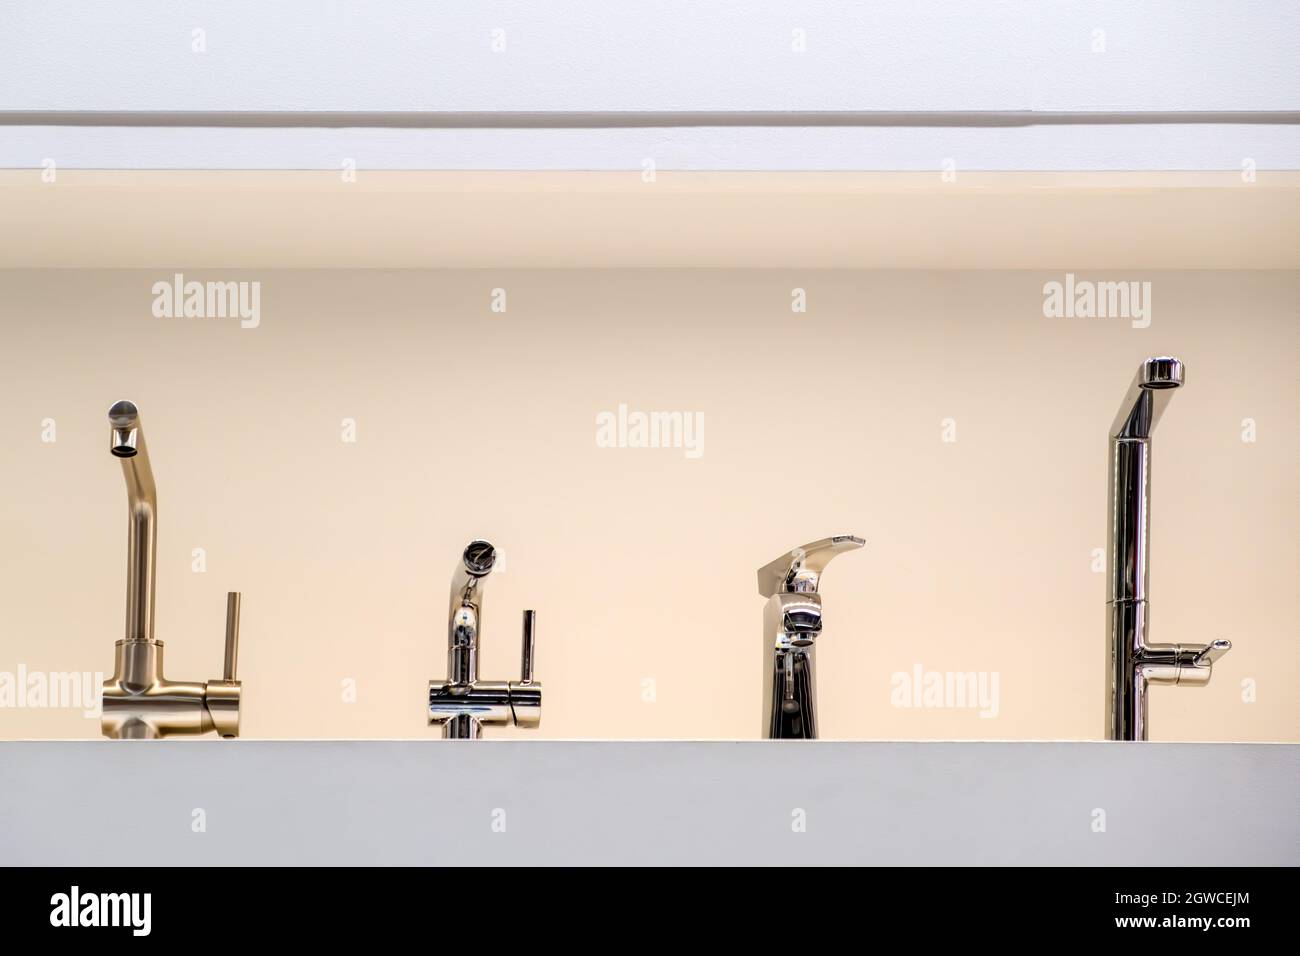 Four Different Faucets In A Row With Copy Space Stock Photo